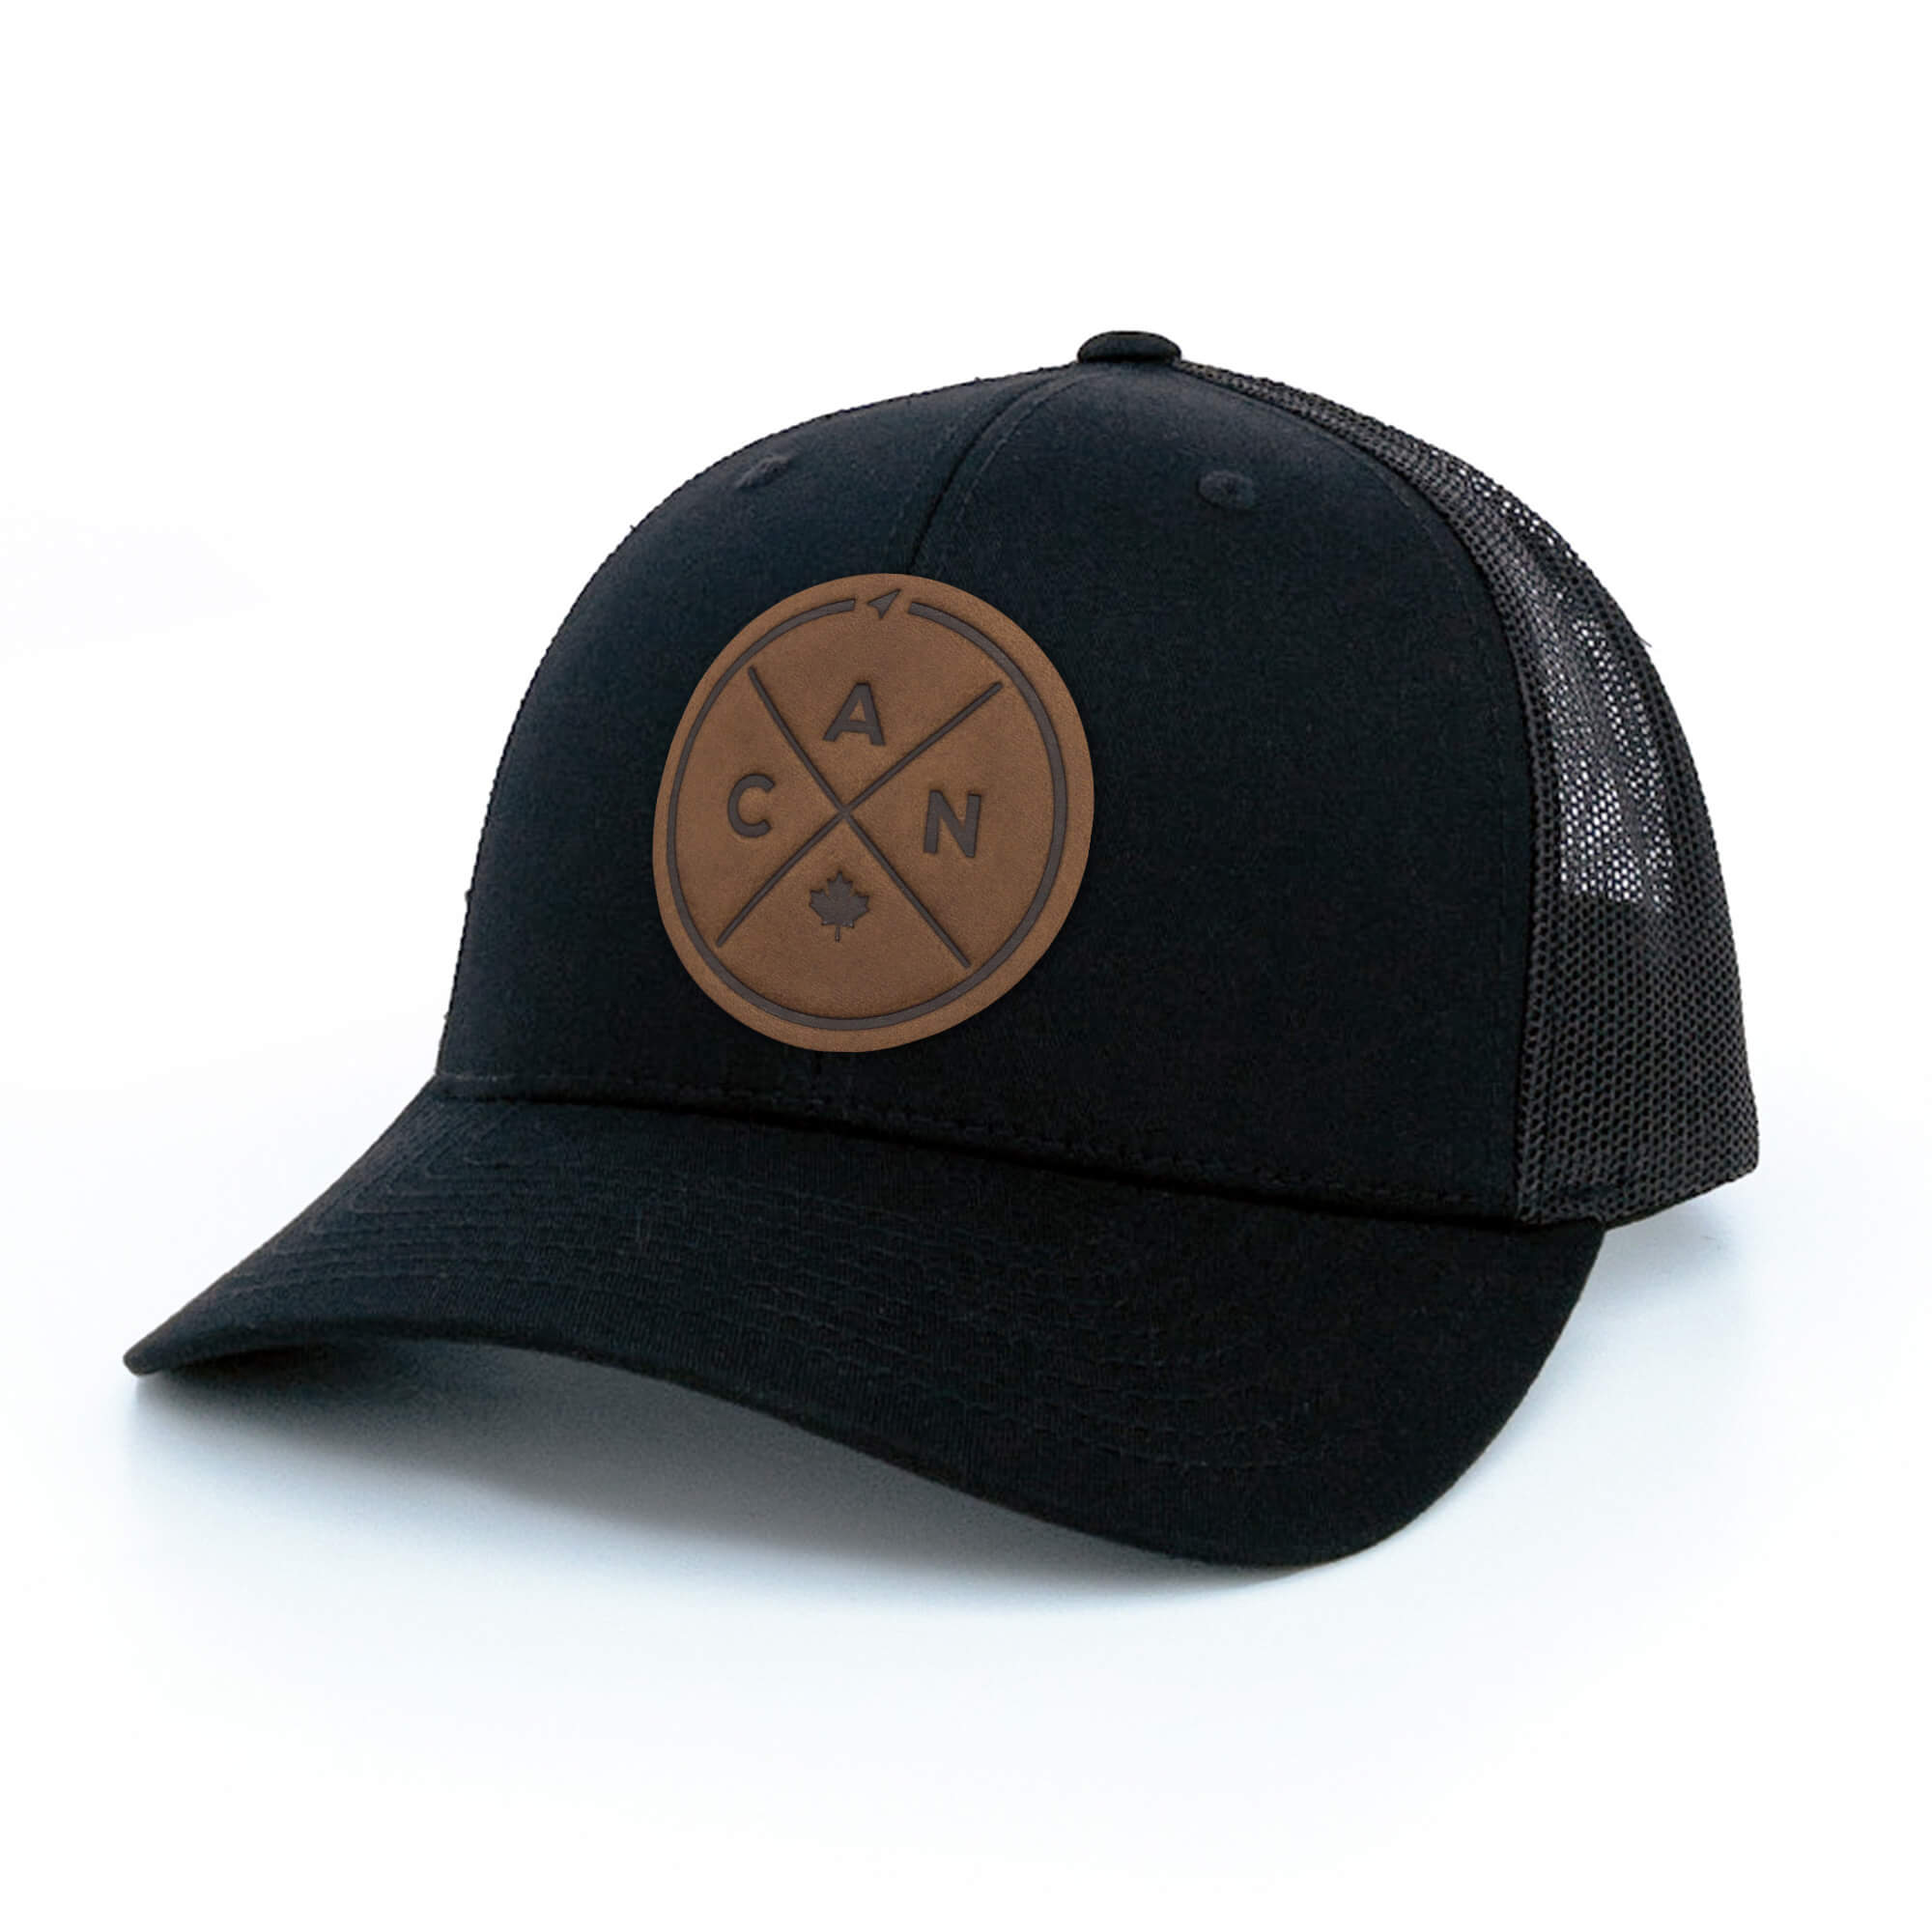 Black trucker hat with full-grain leather patch of Canada Compass | BLACK-002-011, CHARC-002-011, NAVY-002-011, HGREY-002-011, MOSS-002-011, BROWN-002-011, RED-002-011